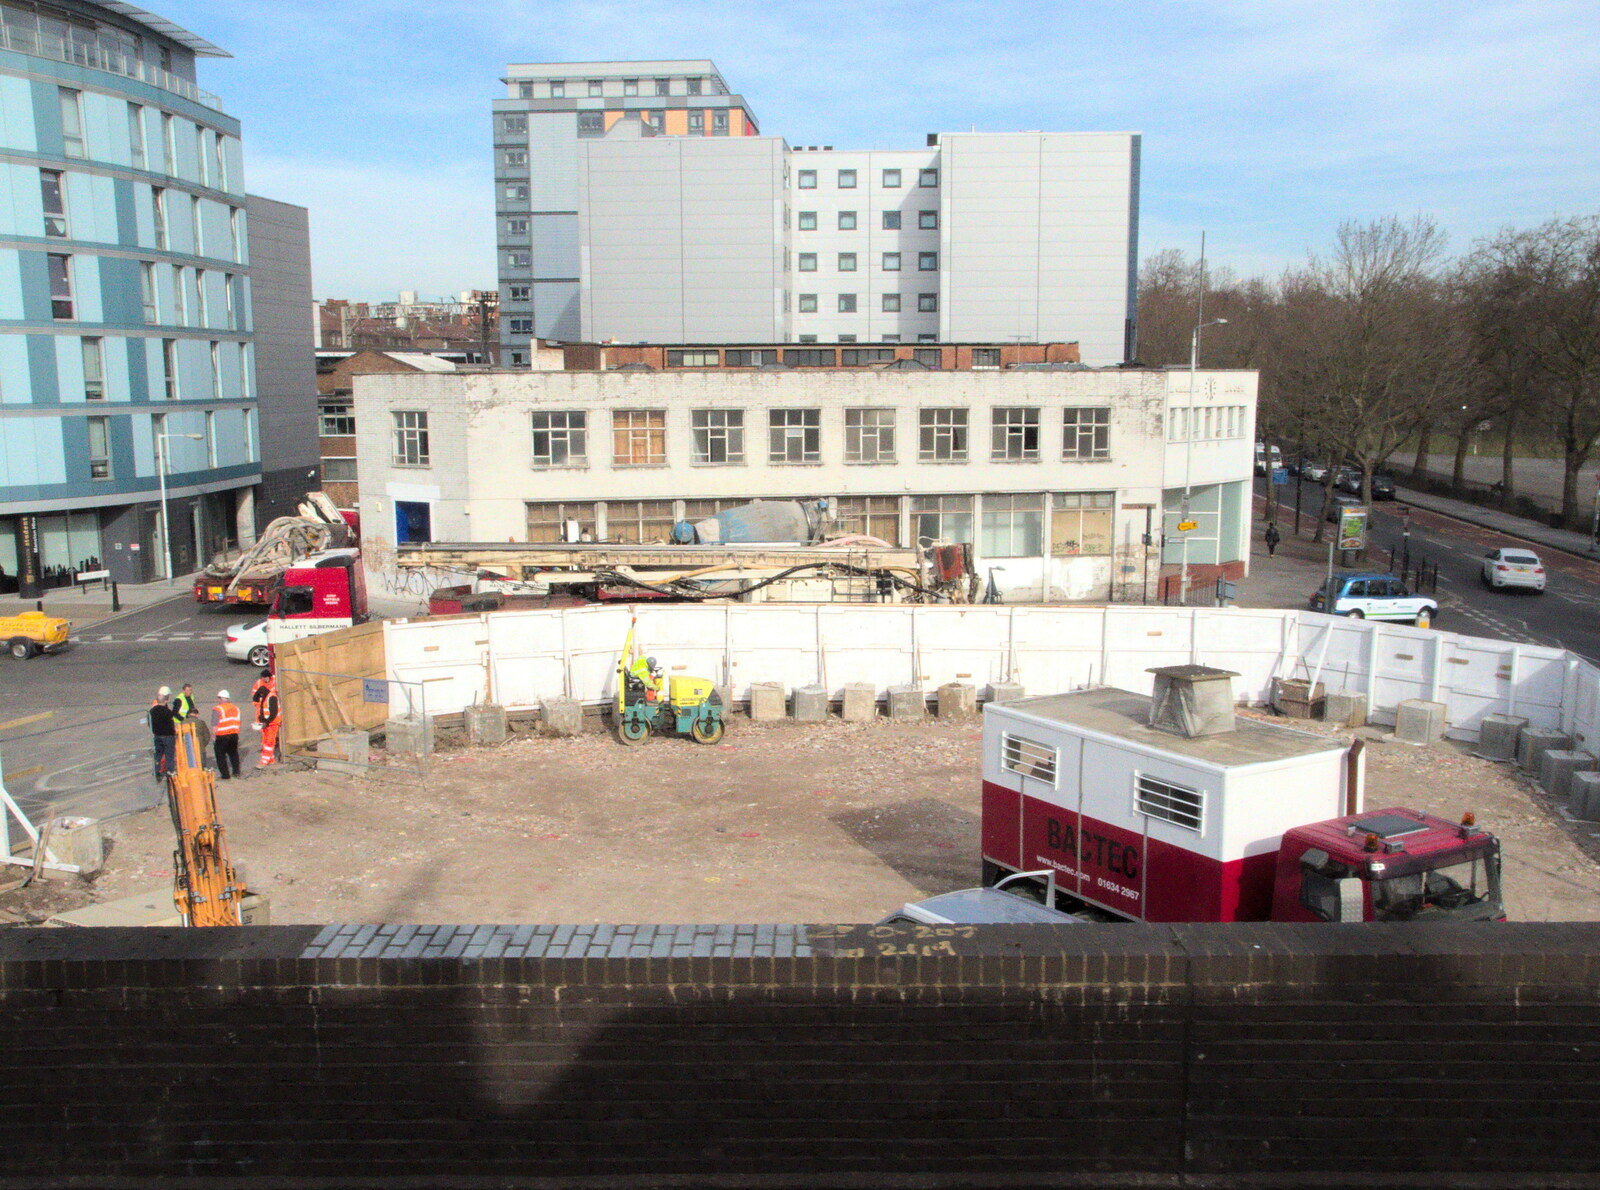 A building site in Bethnal Green from The Mobile Train Office, Diss to London - 5th March 2015